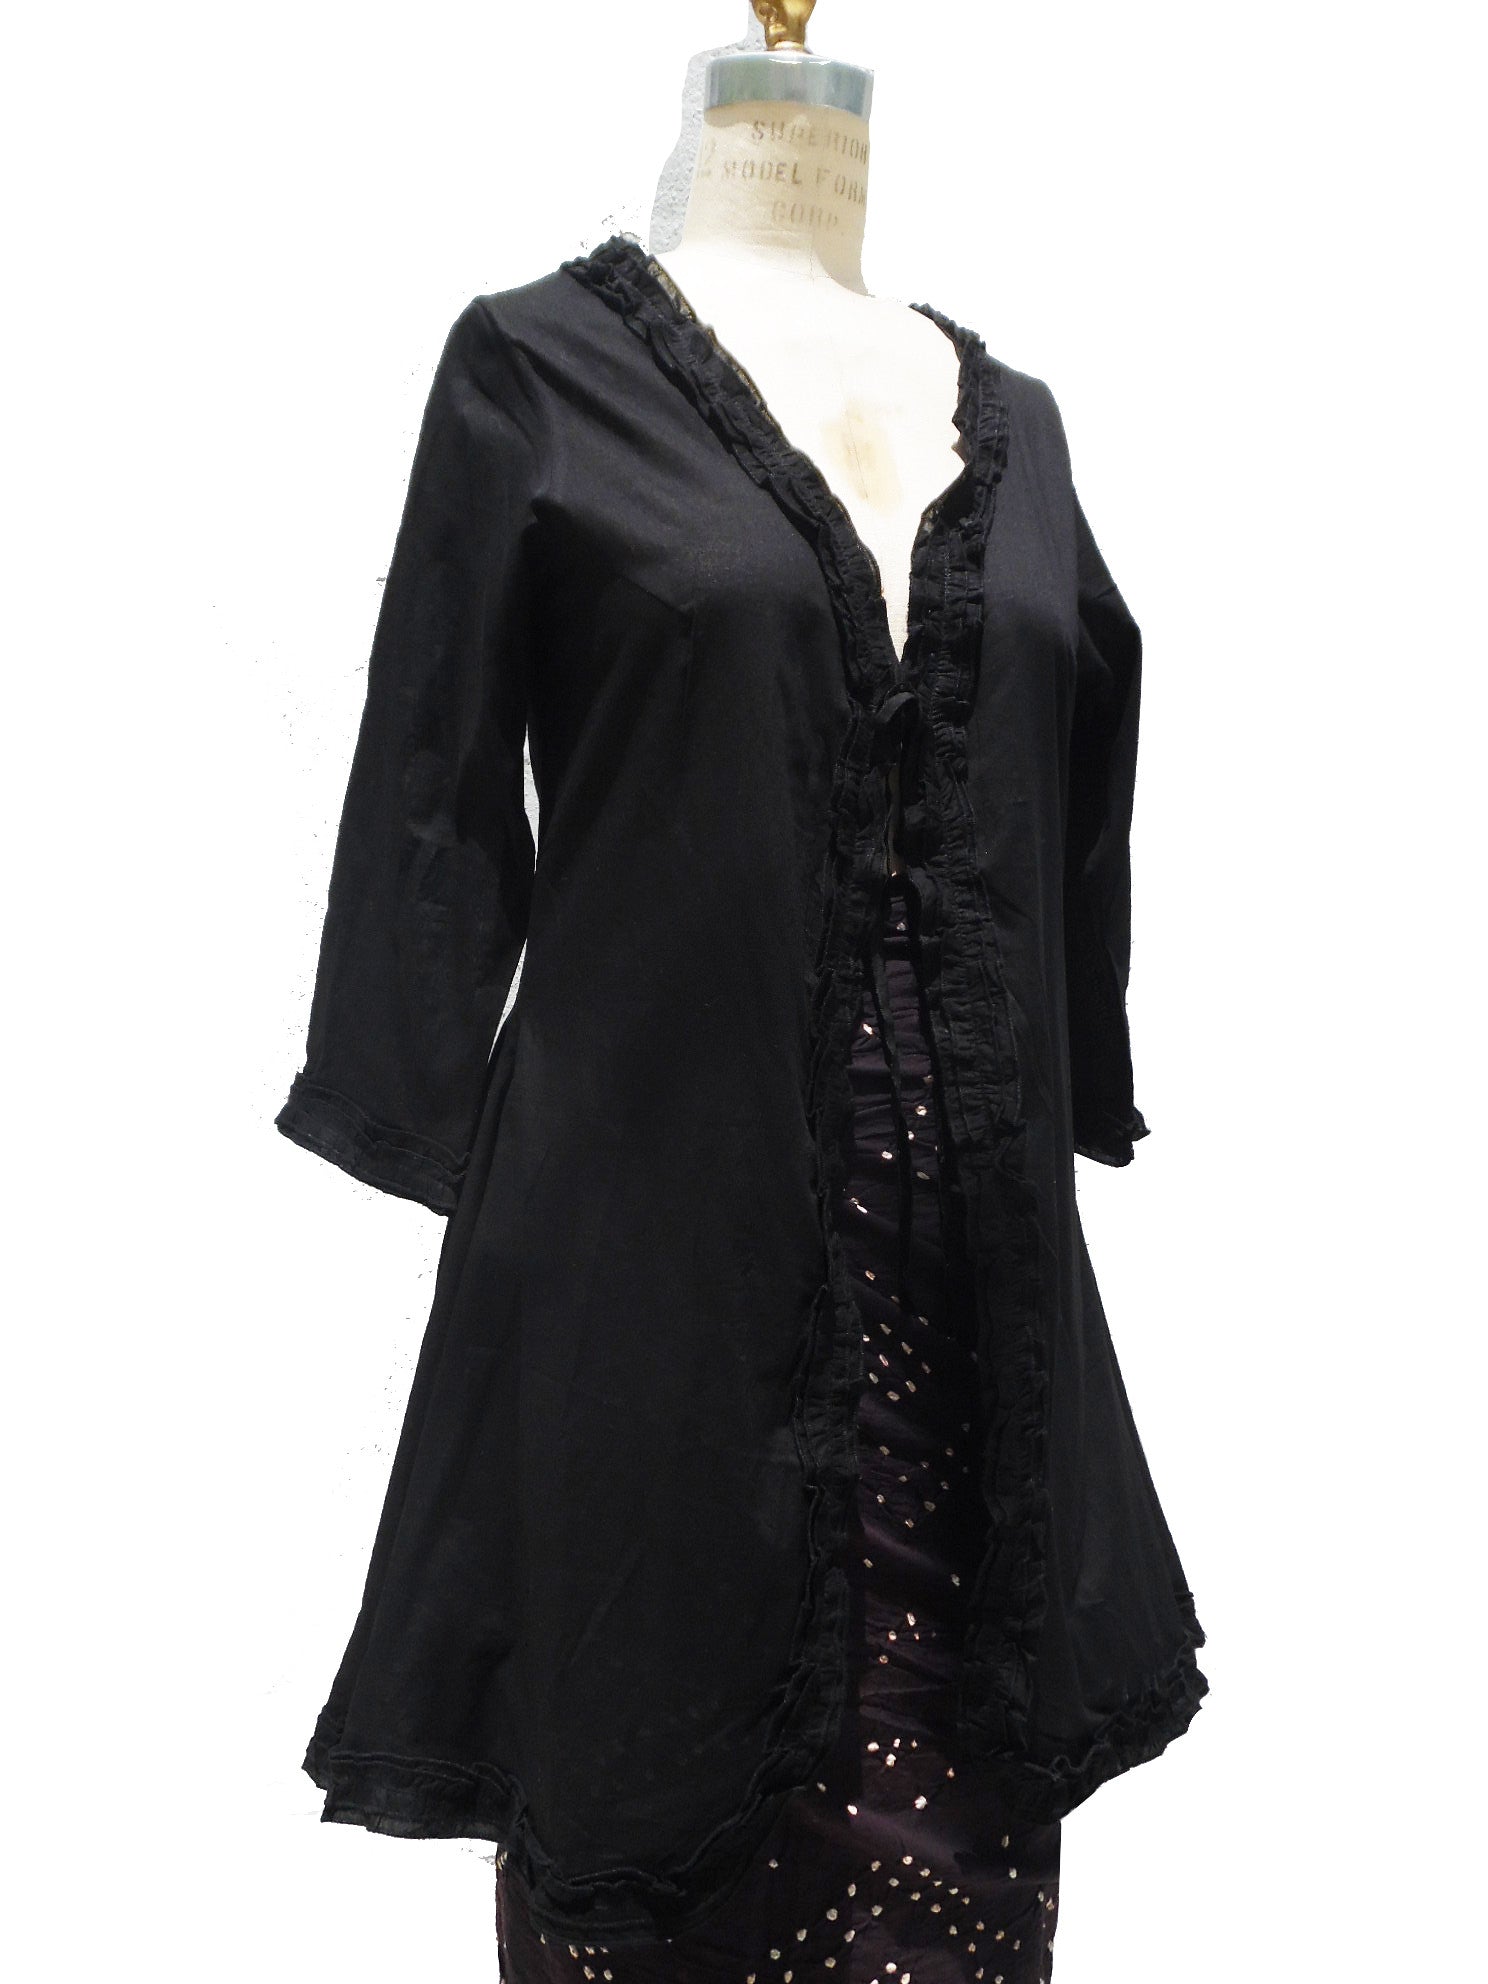 The Lala Beach Cover Up Black